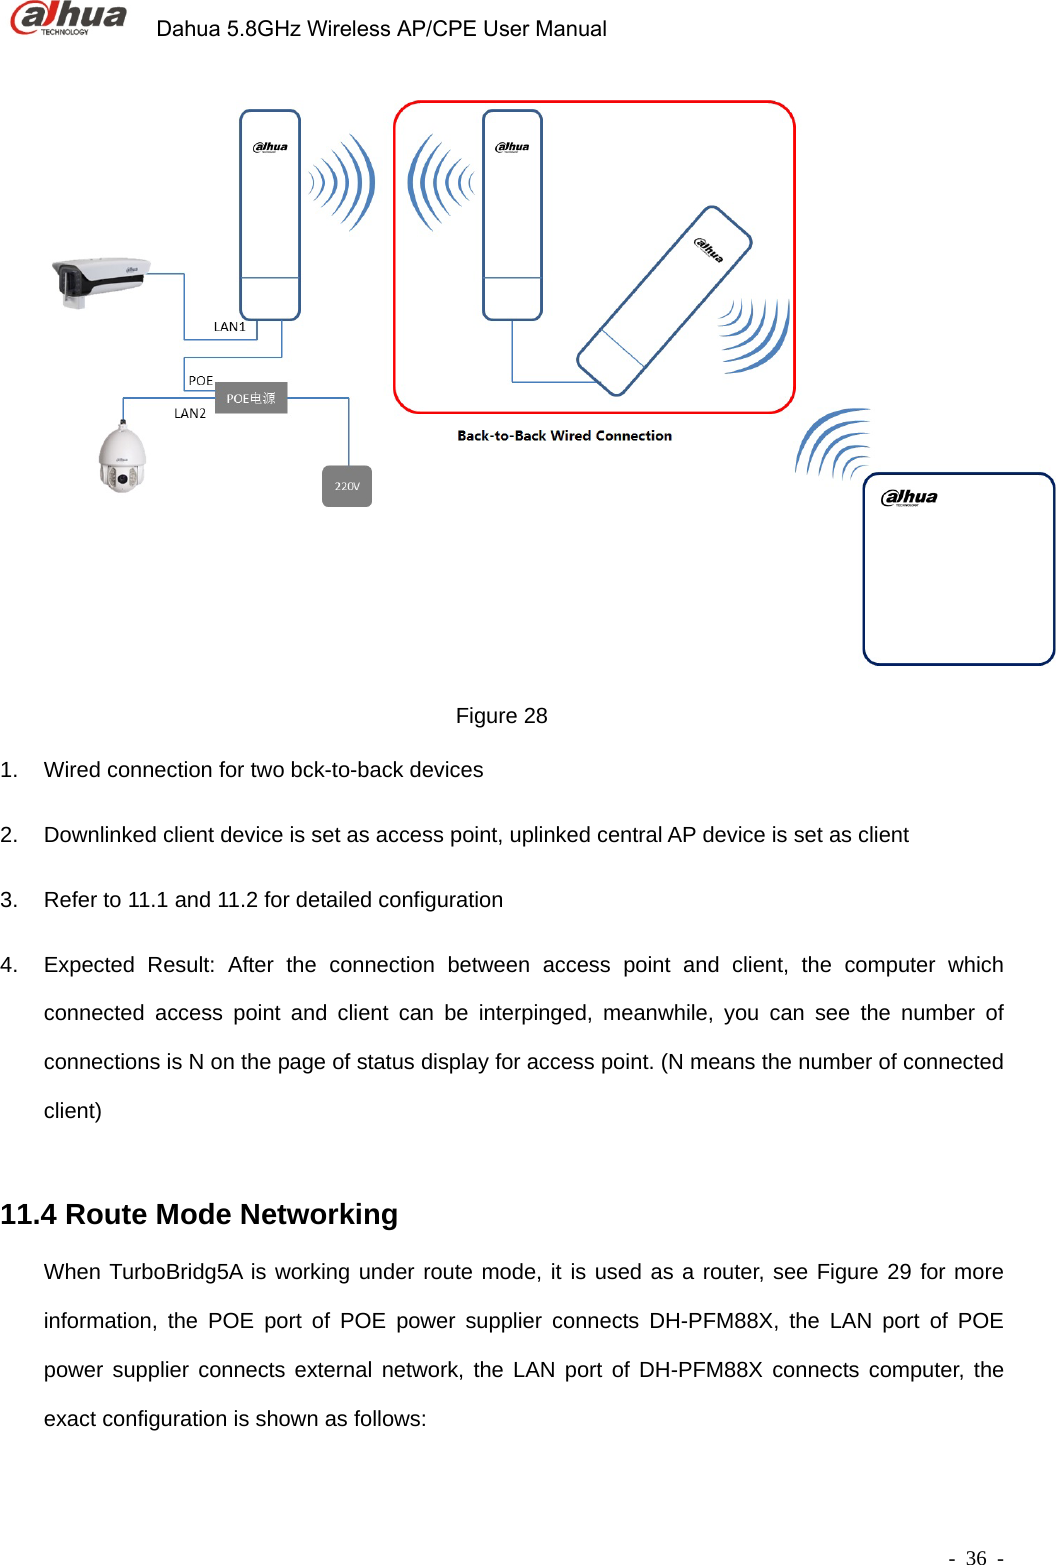             Dahua 5.8GHz Wireless AP/CPE User Manual        - 36 -  Figure 28 1.  Wired connection for two bck-to-back devices 2.  Downlinked client device is set as access point, uplinked central AP device is set as client   3.  Refer to 11.1 and 11.2 for detailed configuration 4.  Expected Result: After the connection between access point and client, the computer which connected access point and client can be interpinged, meanwhile, you can see the number of connections is N on the page of status display for access point. (N means the number of connected client) 11.4 Route Mode Networking When TurboBridg5A is working under route mode, it is used as a router, see Figure 29 for more information, the POE port of POE power supplier connects DH-PFM88X, the LAN port of POE power supplier connects external network, the LAN port of DH-PFM88X connects computer, the exact configuration is shown as follows:   